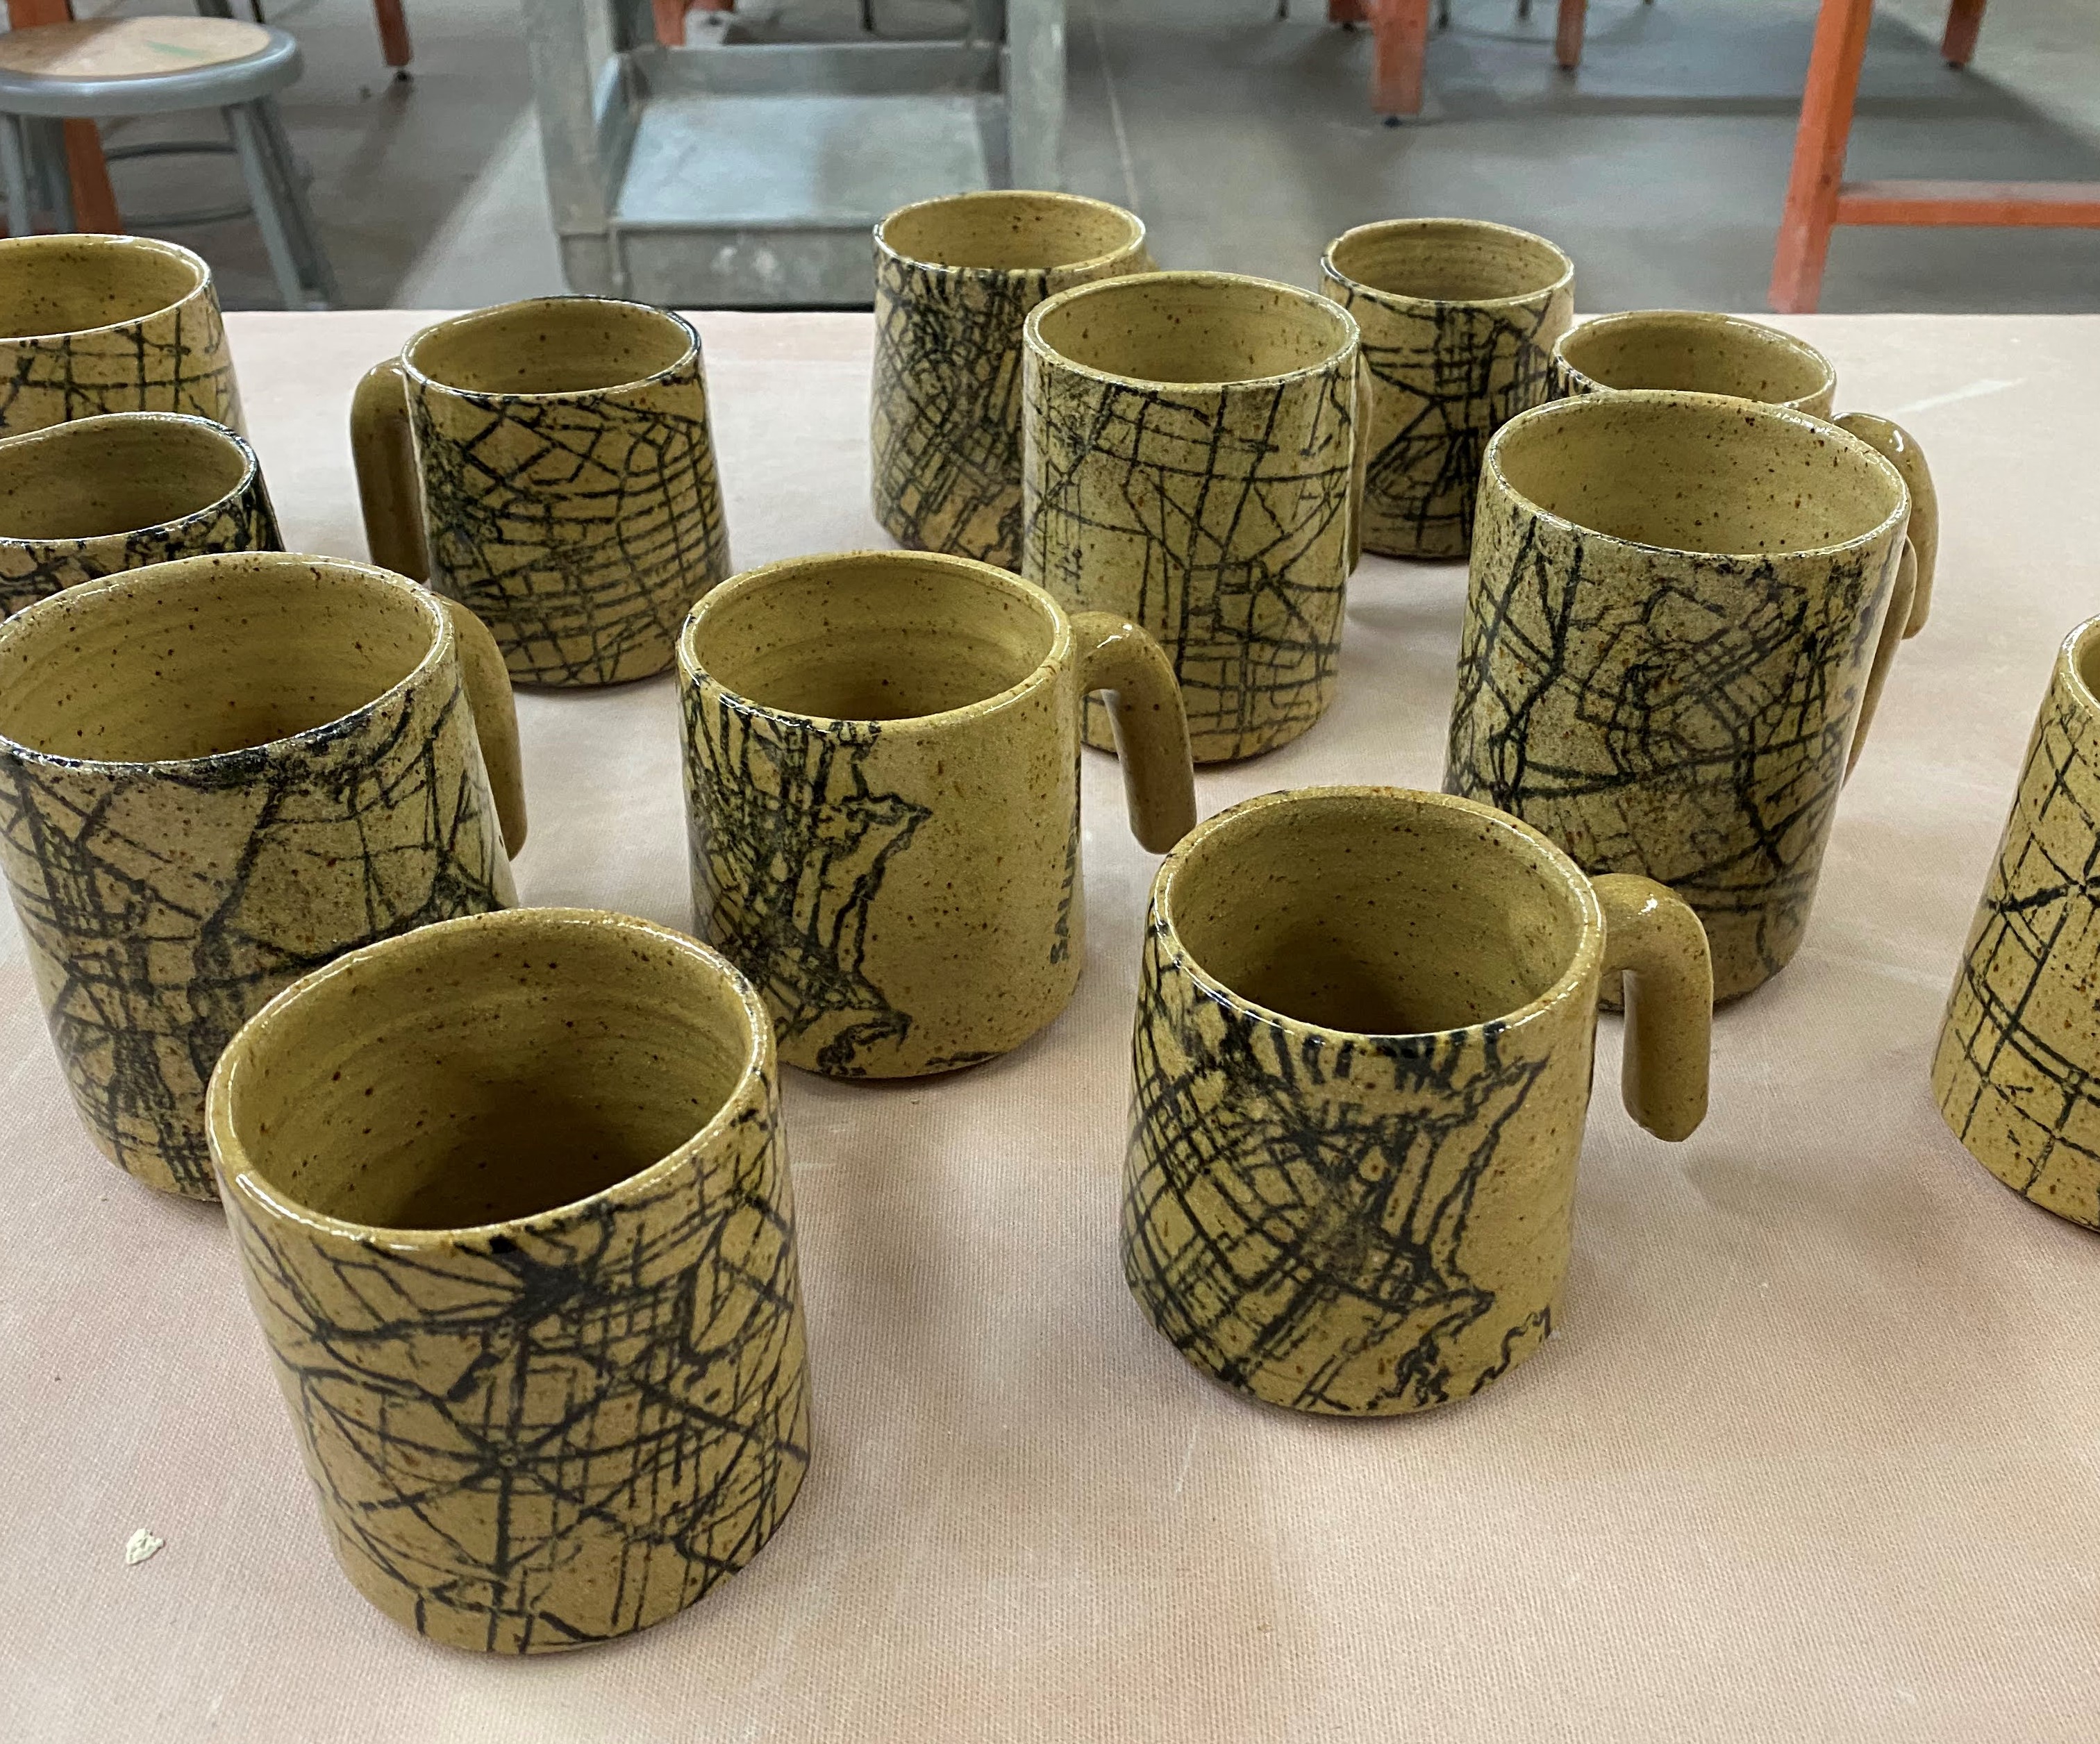 Cityscape mugs commissioned to be of cities in Latin America